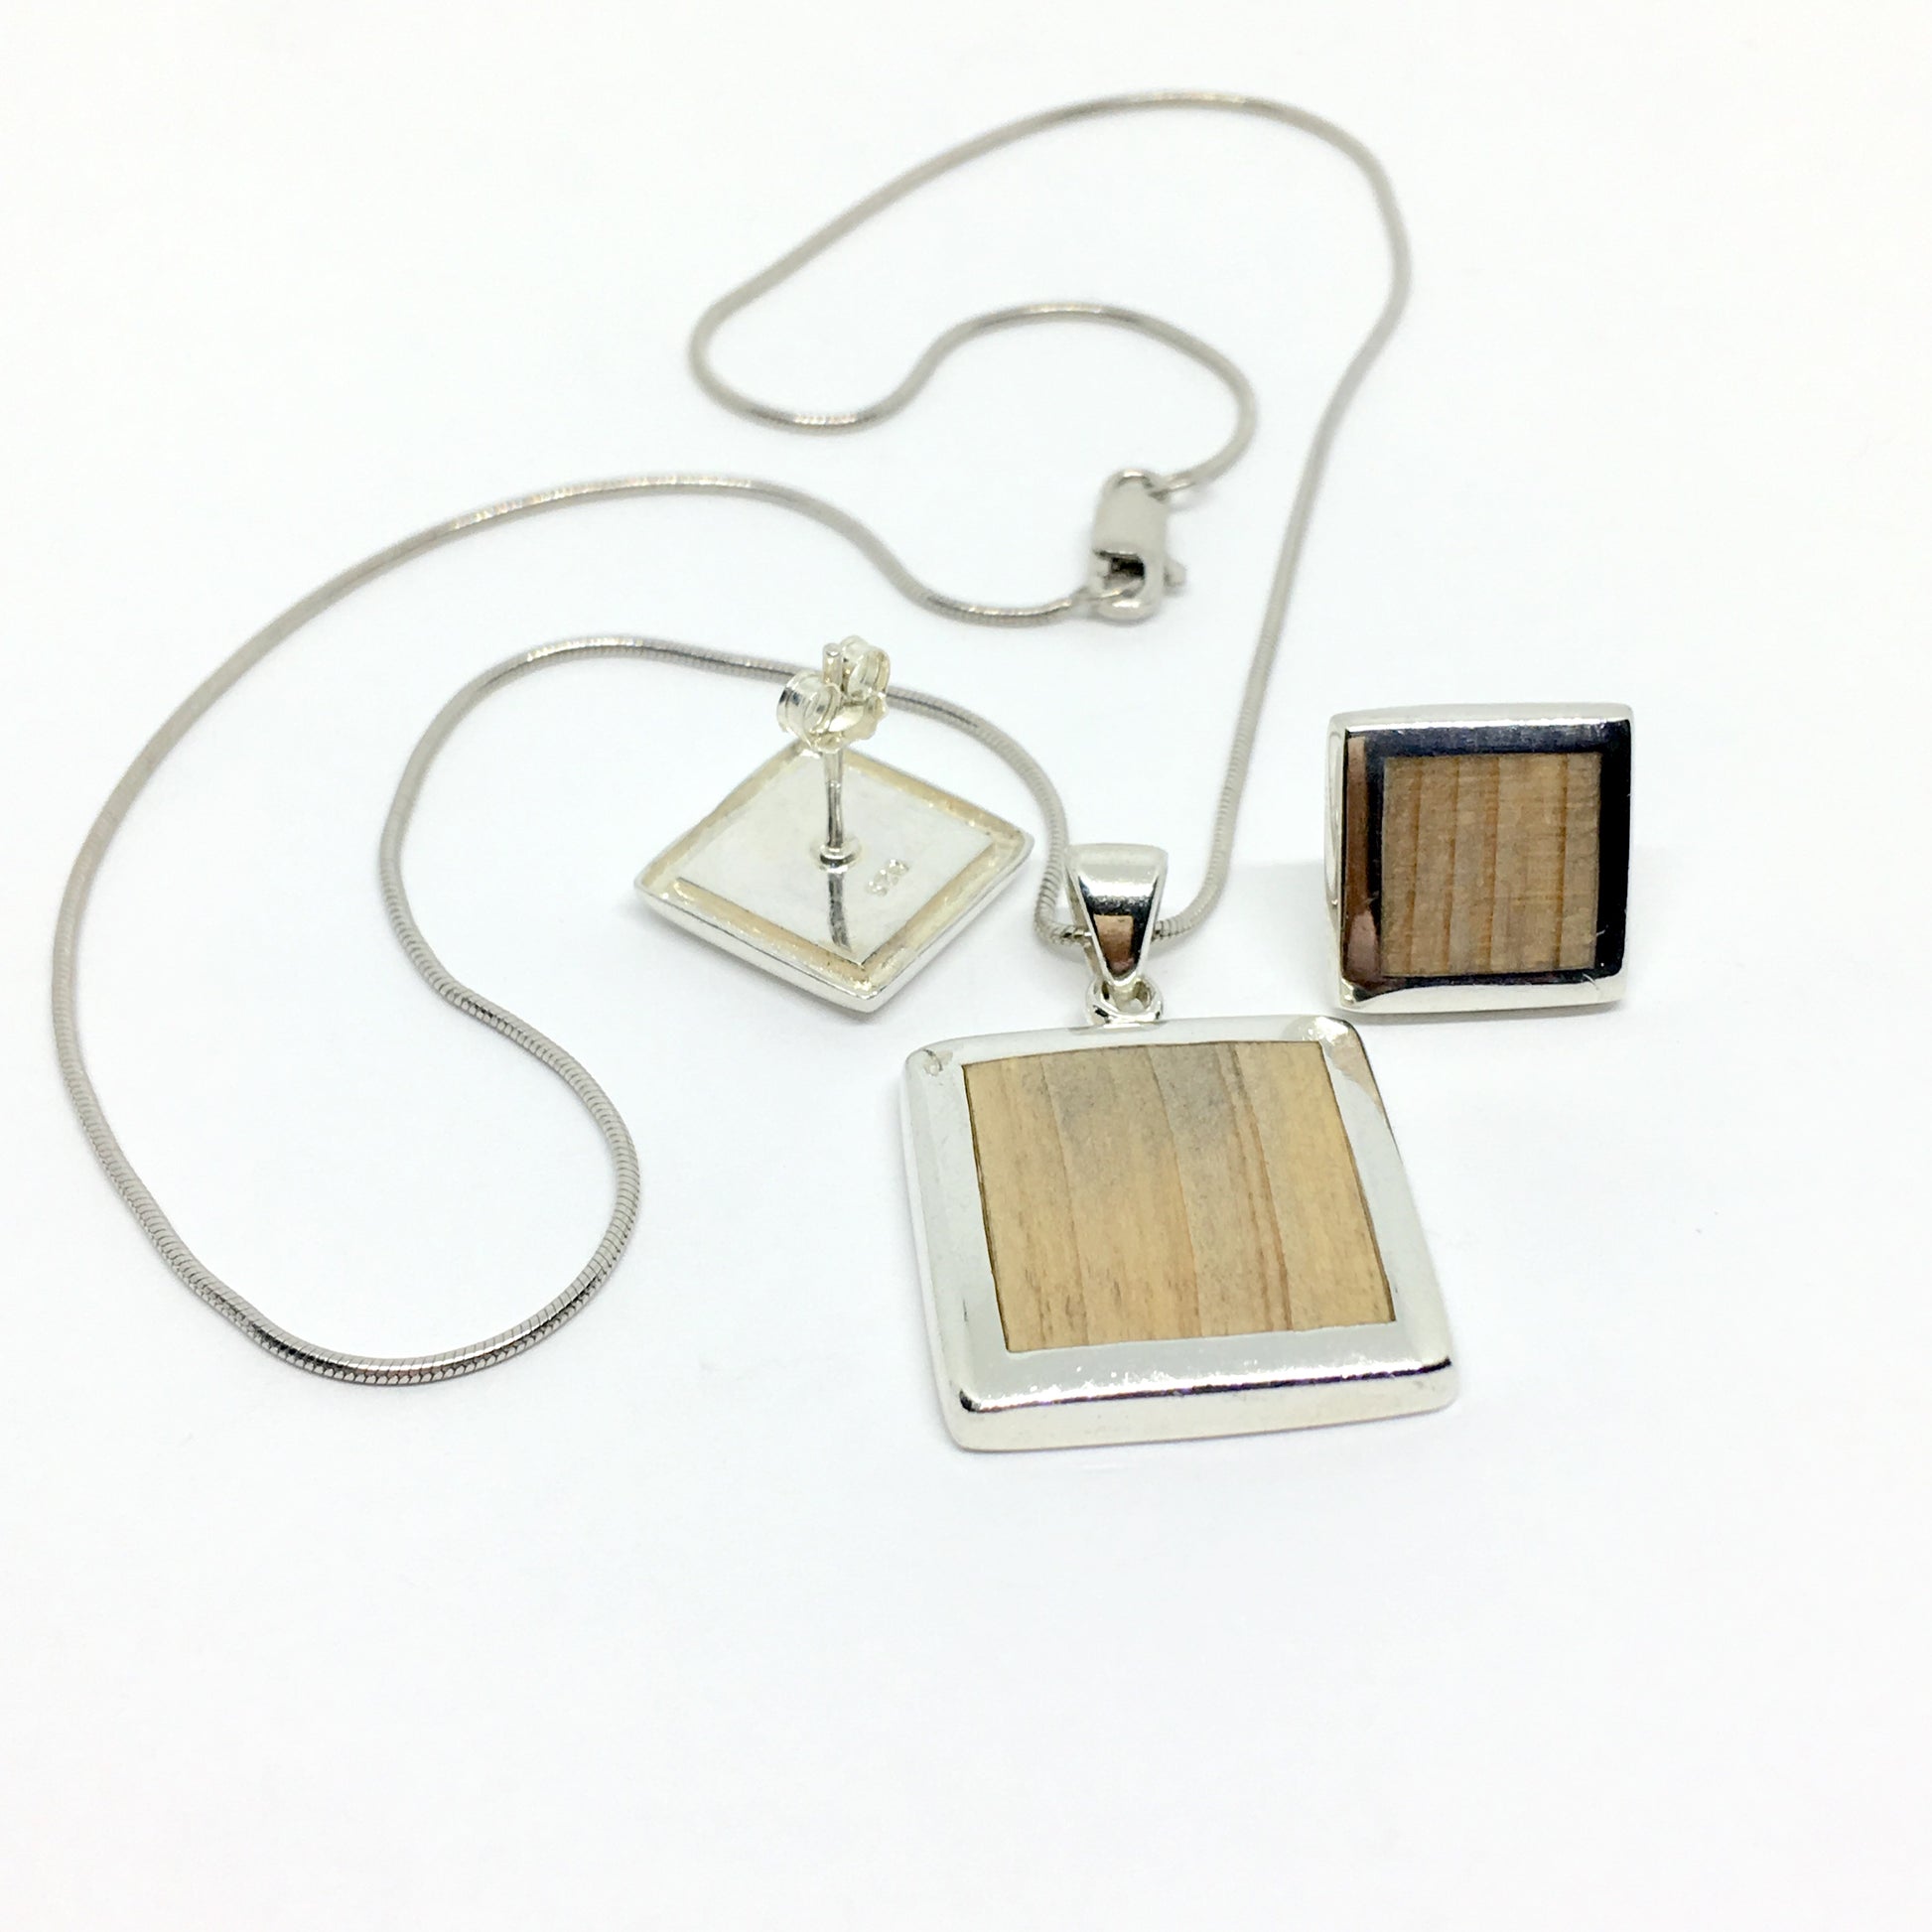 Matching Jewelry Set - Sterling Silver Natural Wood inlay Geometric Square Design Pendant Necklace & Earrings set